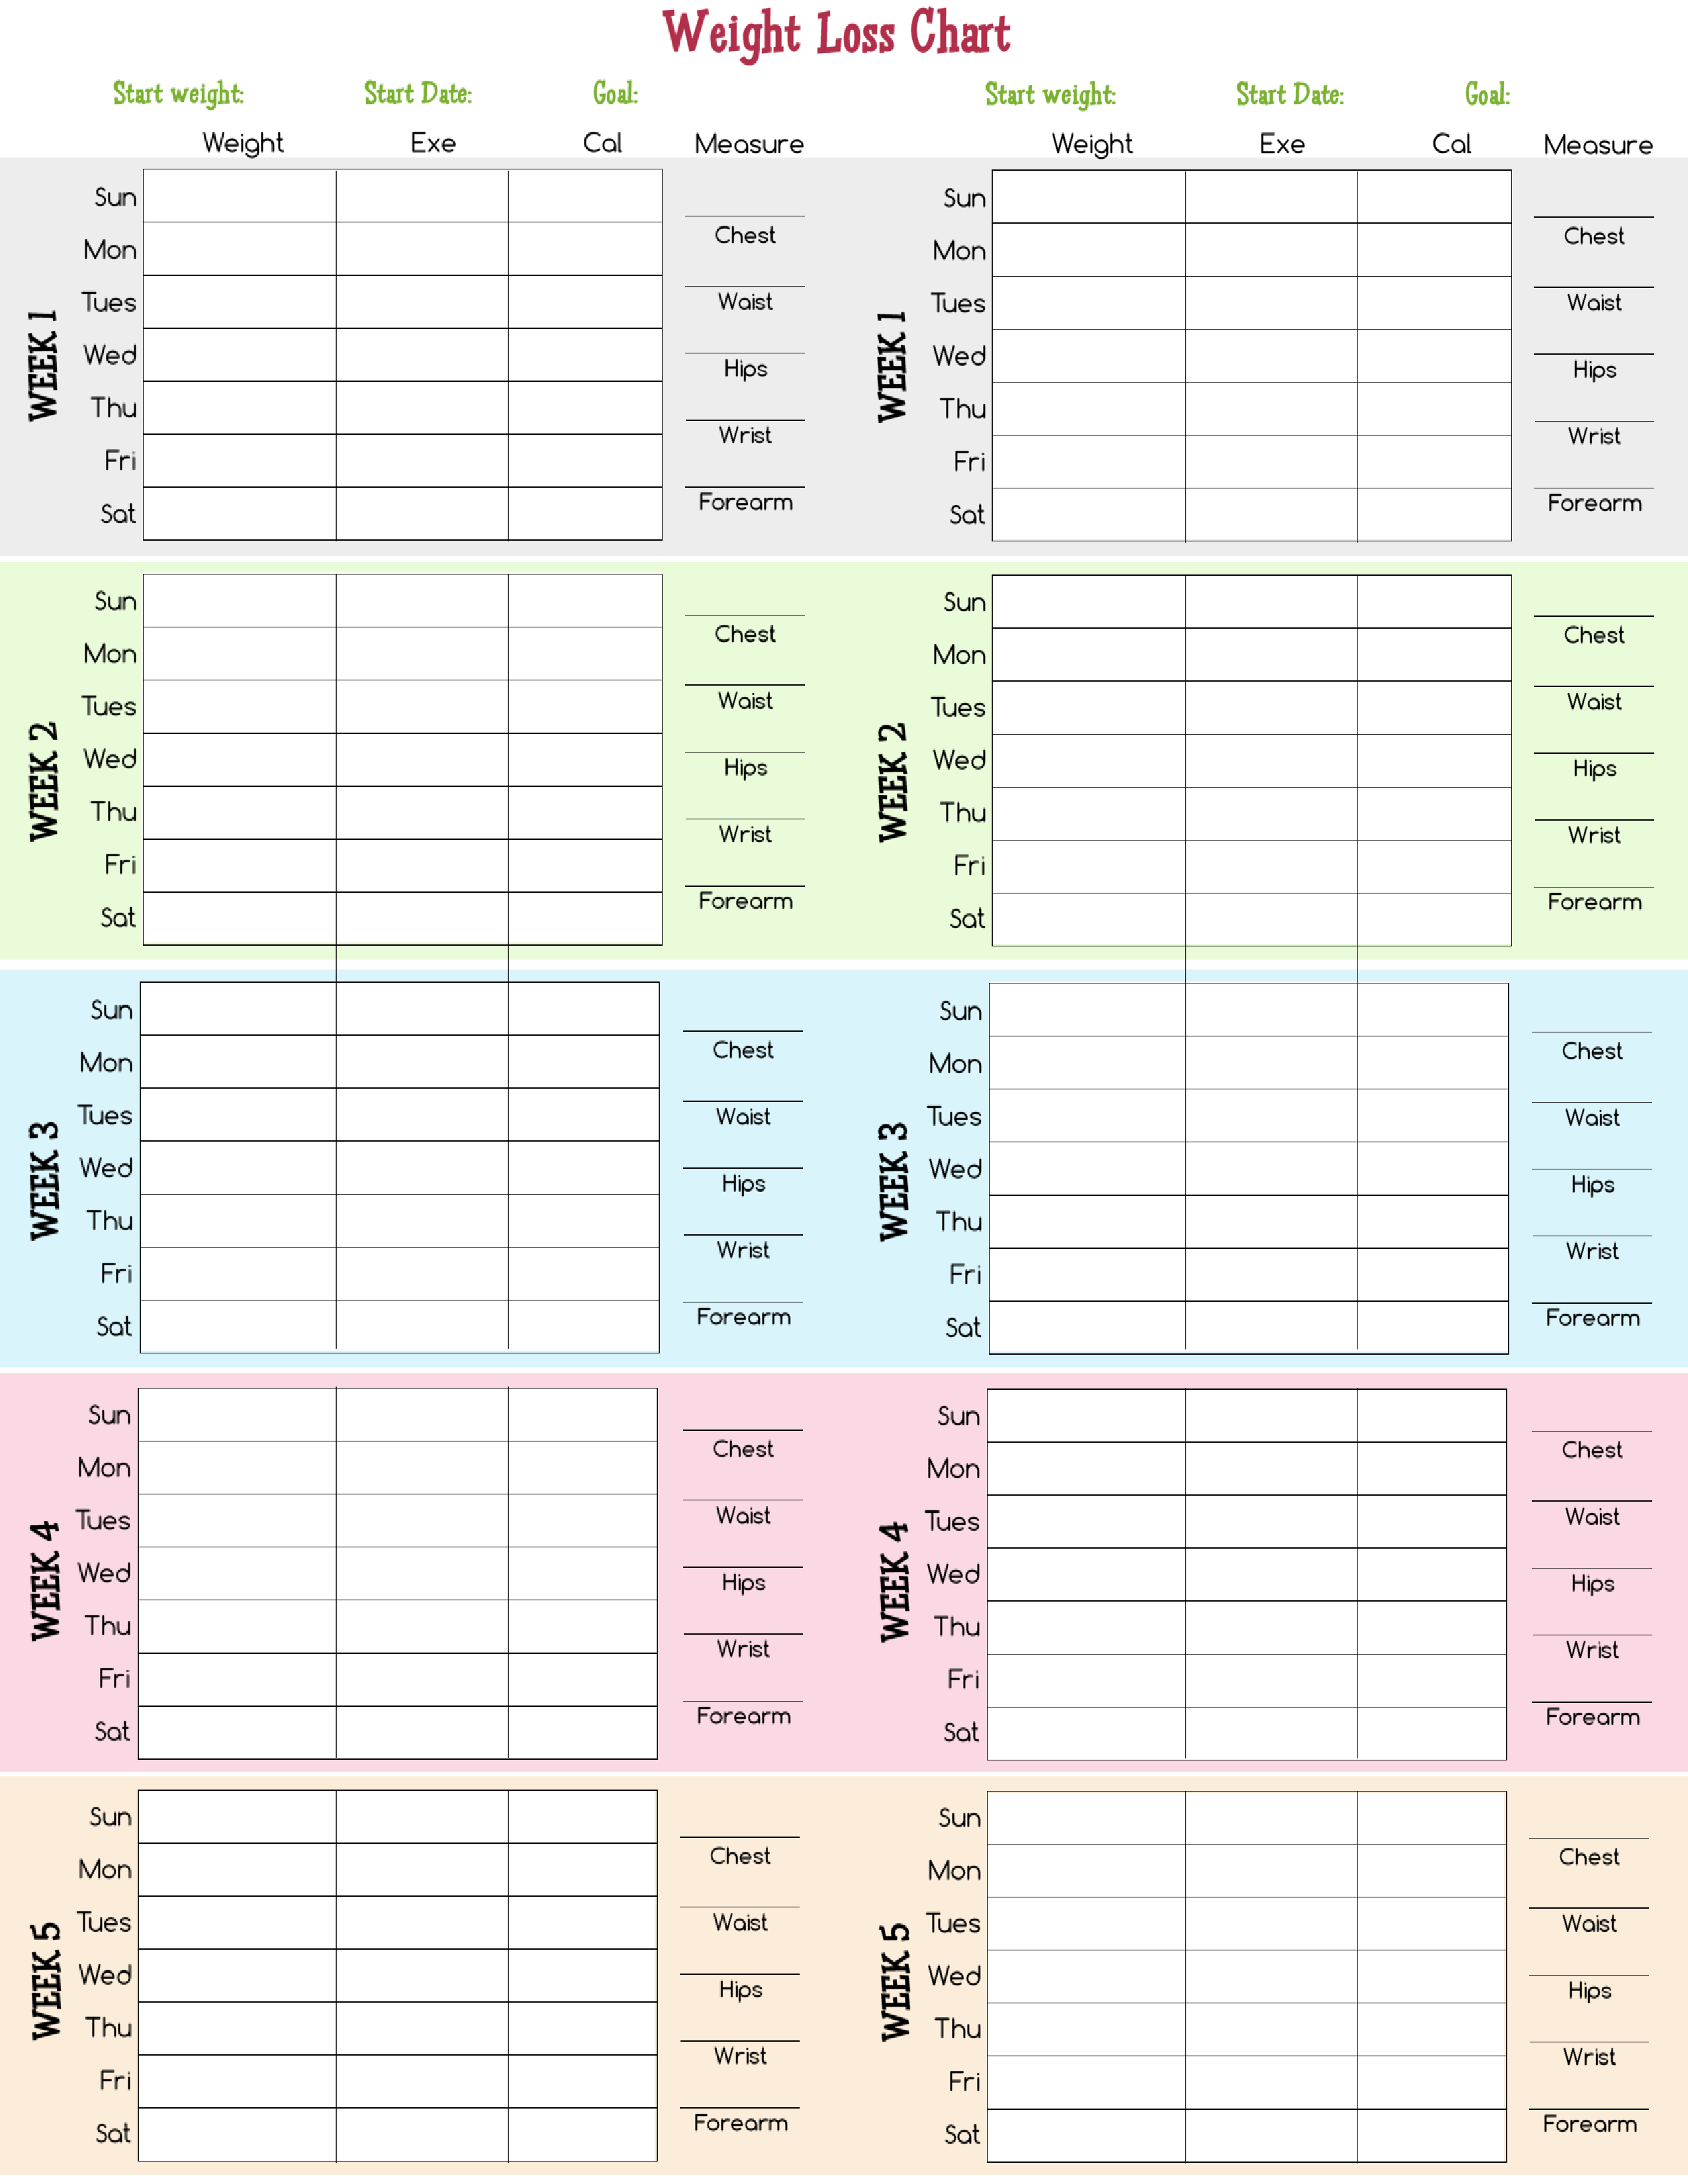 group weight tracker loss template for excel